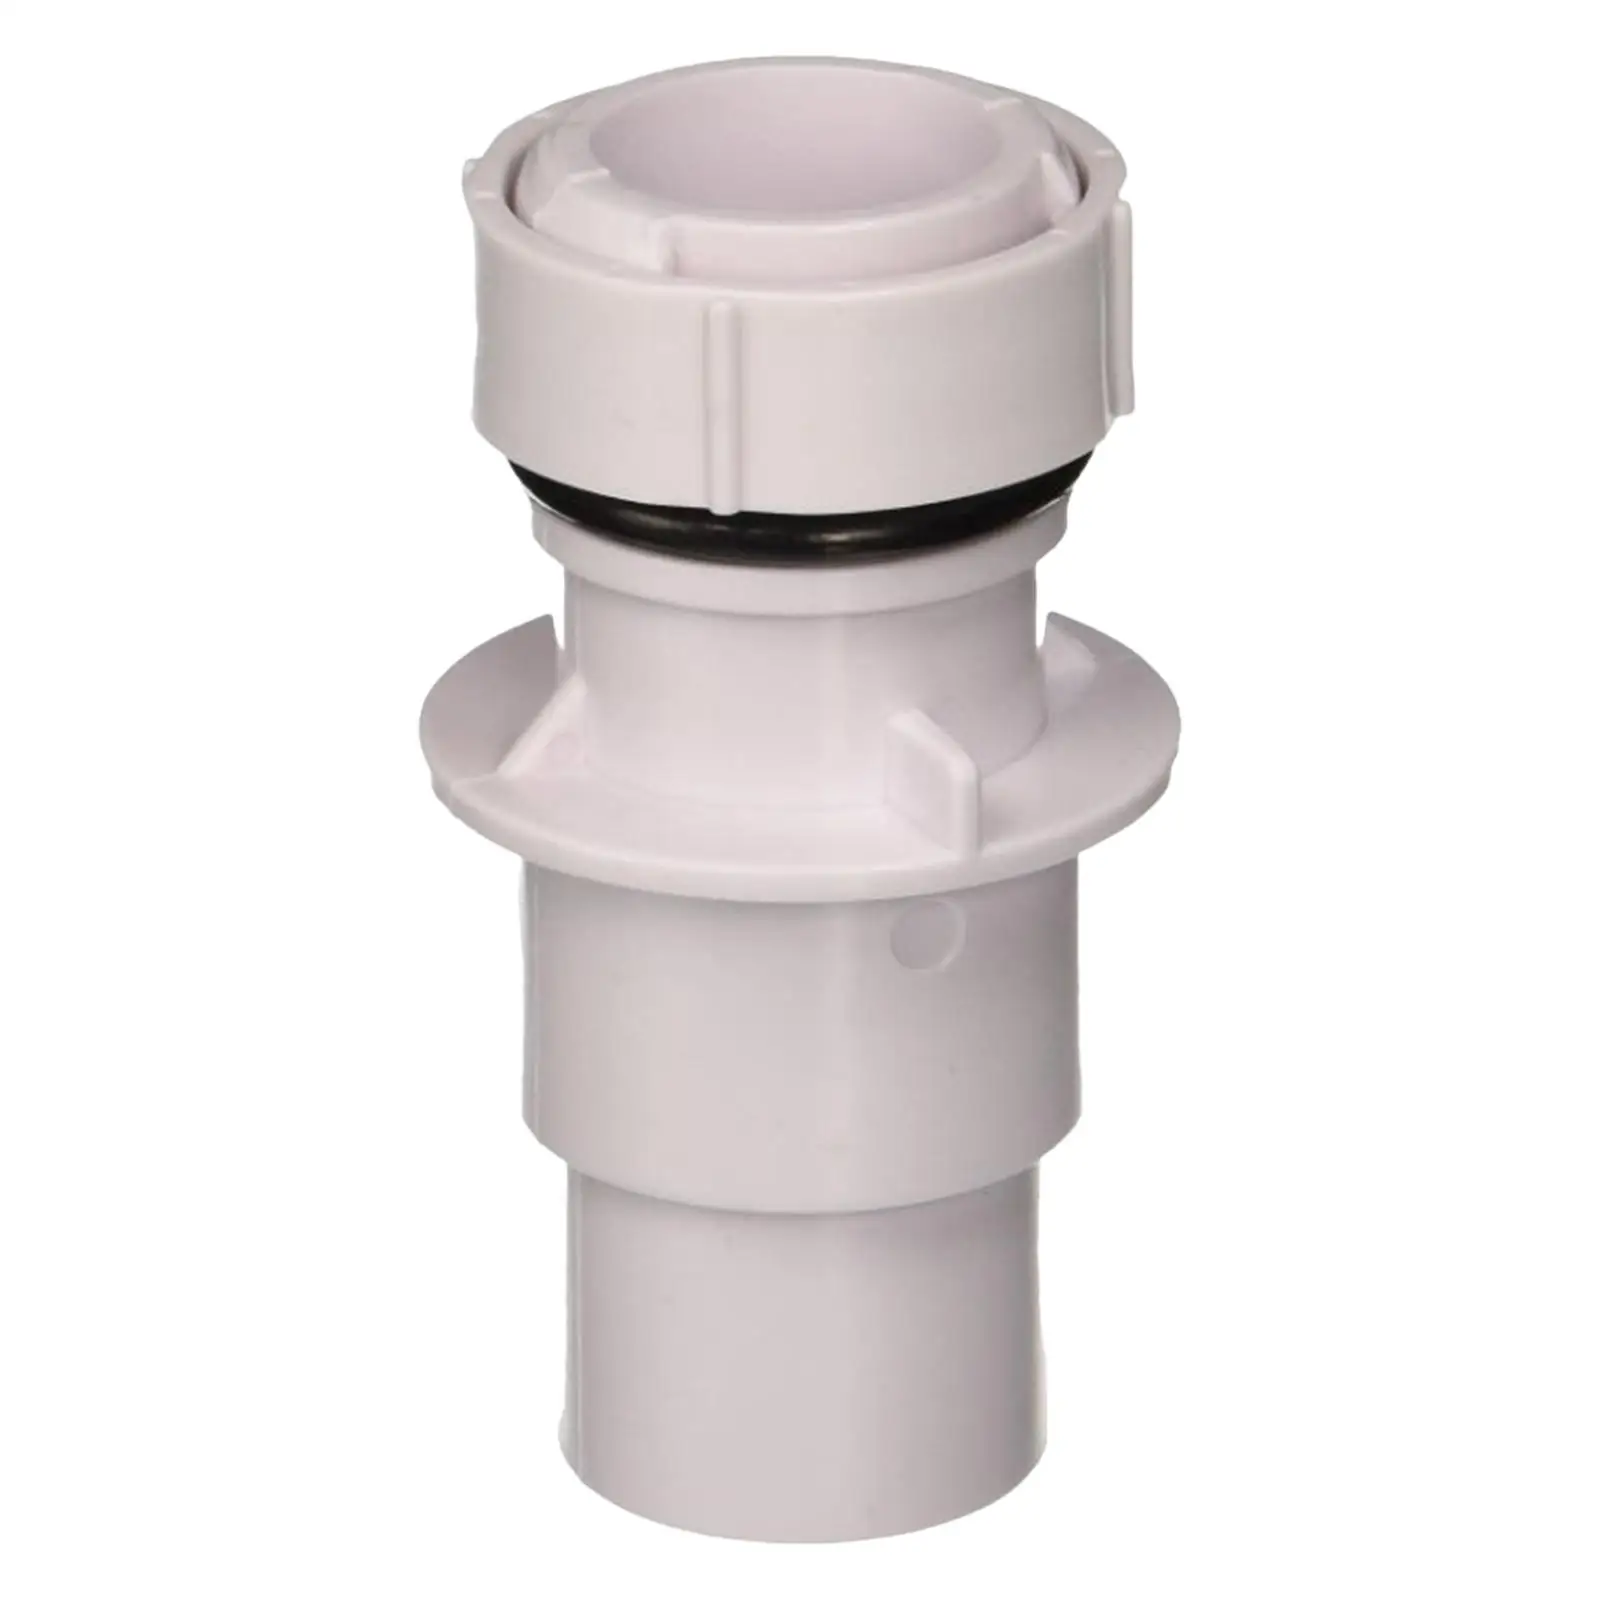 4552 Skim Filter Pump Adapter Durable Pool Cleaning Fittings for Skimmer Plumbing Connection above Ground Pool Pump Supplies